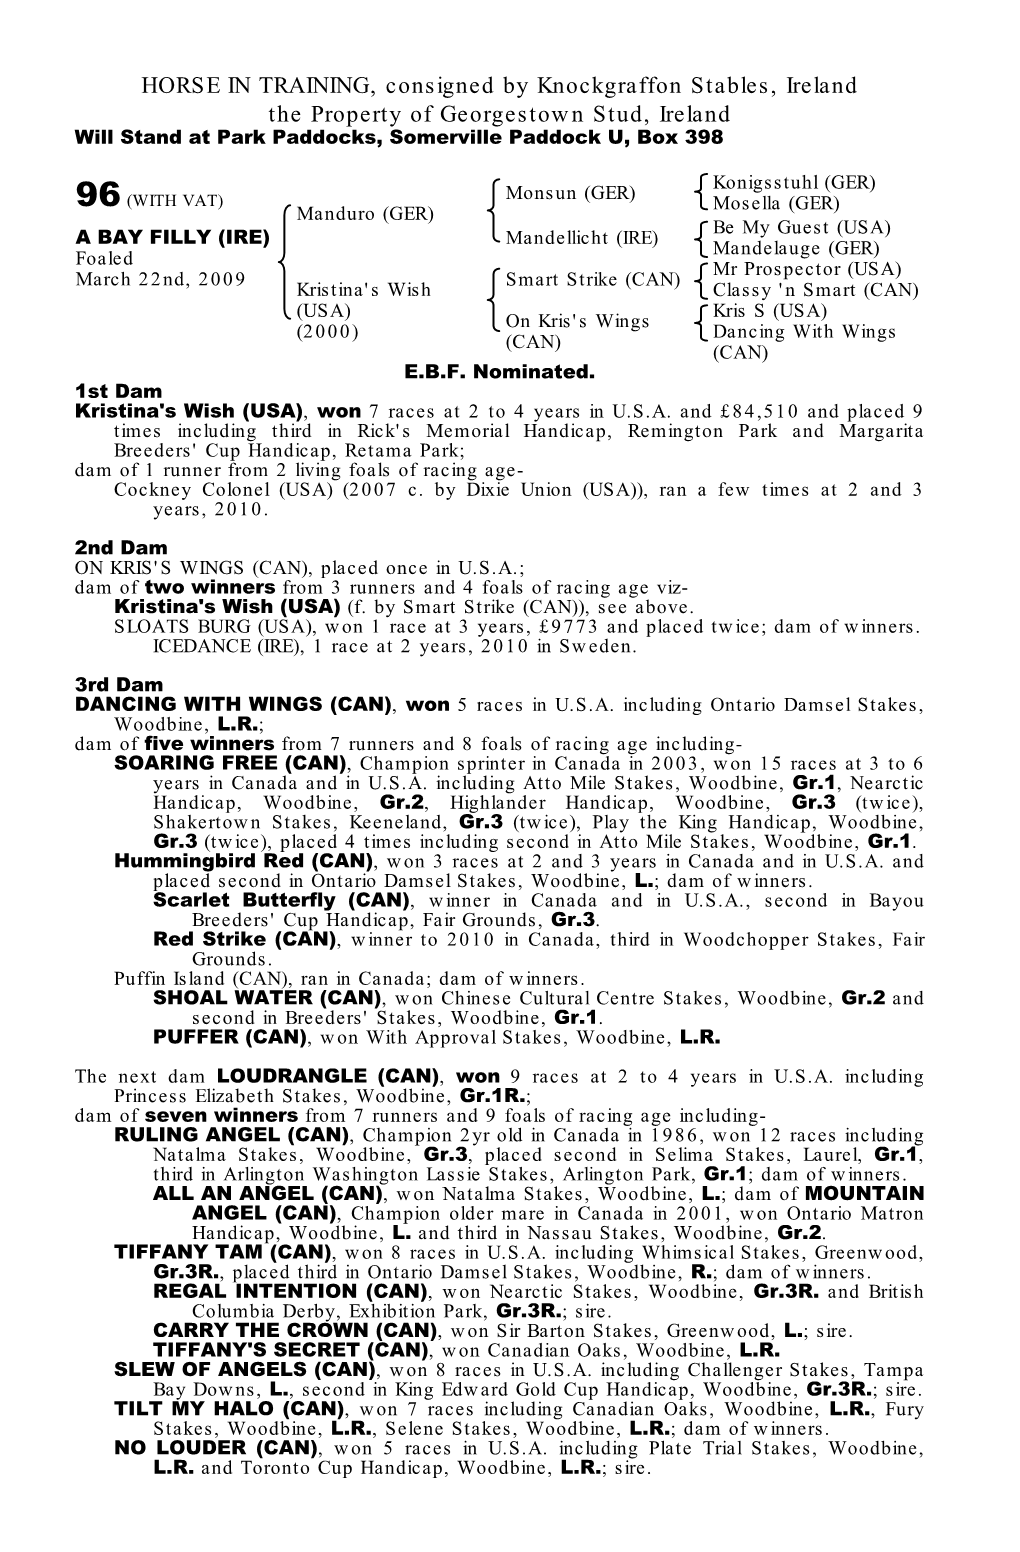 HORSE in TRAINING, Consigned by Knockgraffon Stables, Ireland the Property of Georgestown Stud, Ireland Will Stand at Park Paddocks, Somerville Paddock U, Box 398